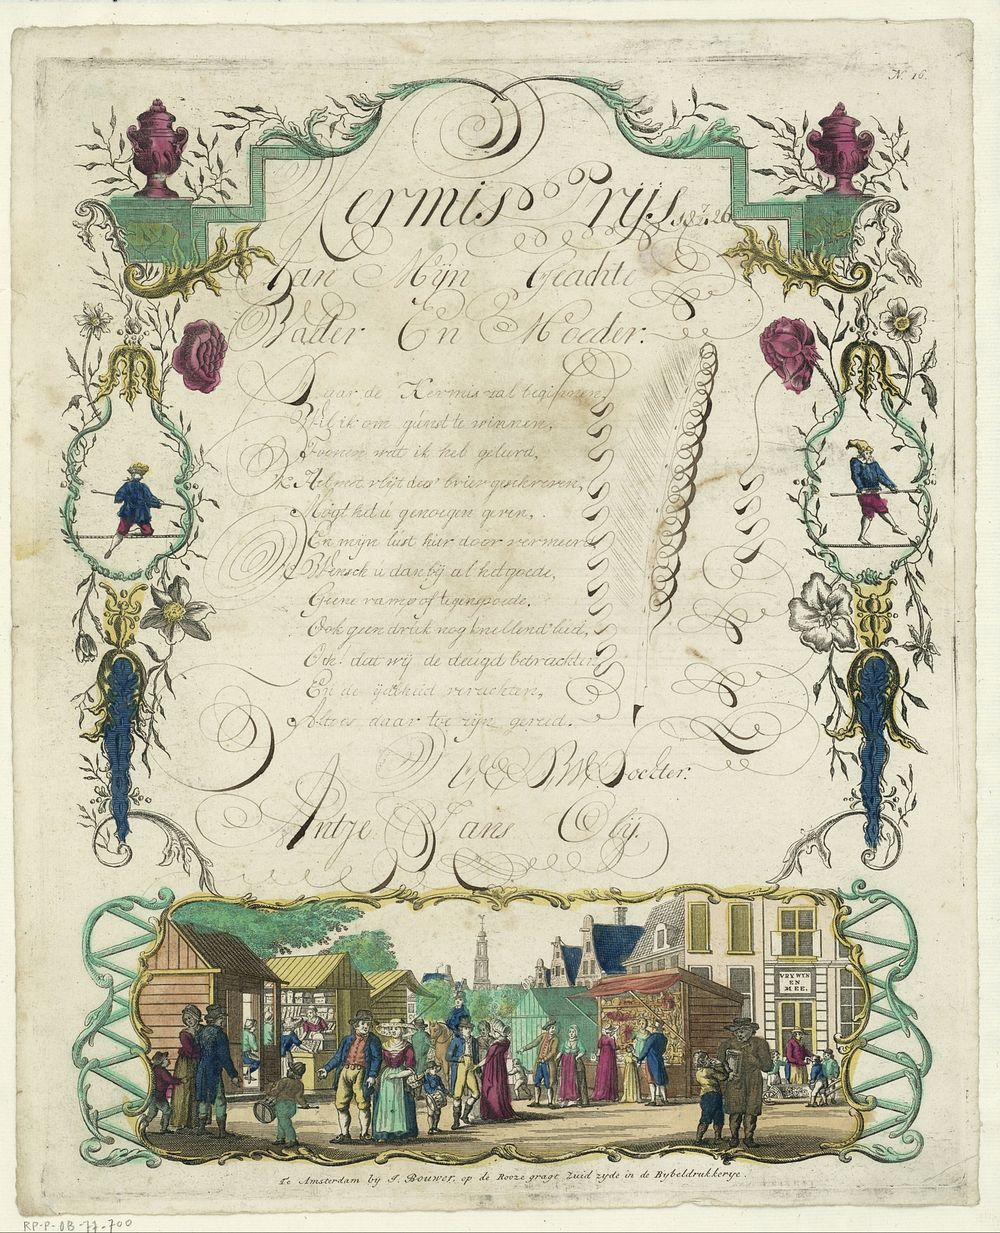 Wensbrief met kermistafereel (1826) by Johannes Bouwer and anonymous